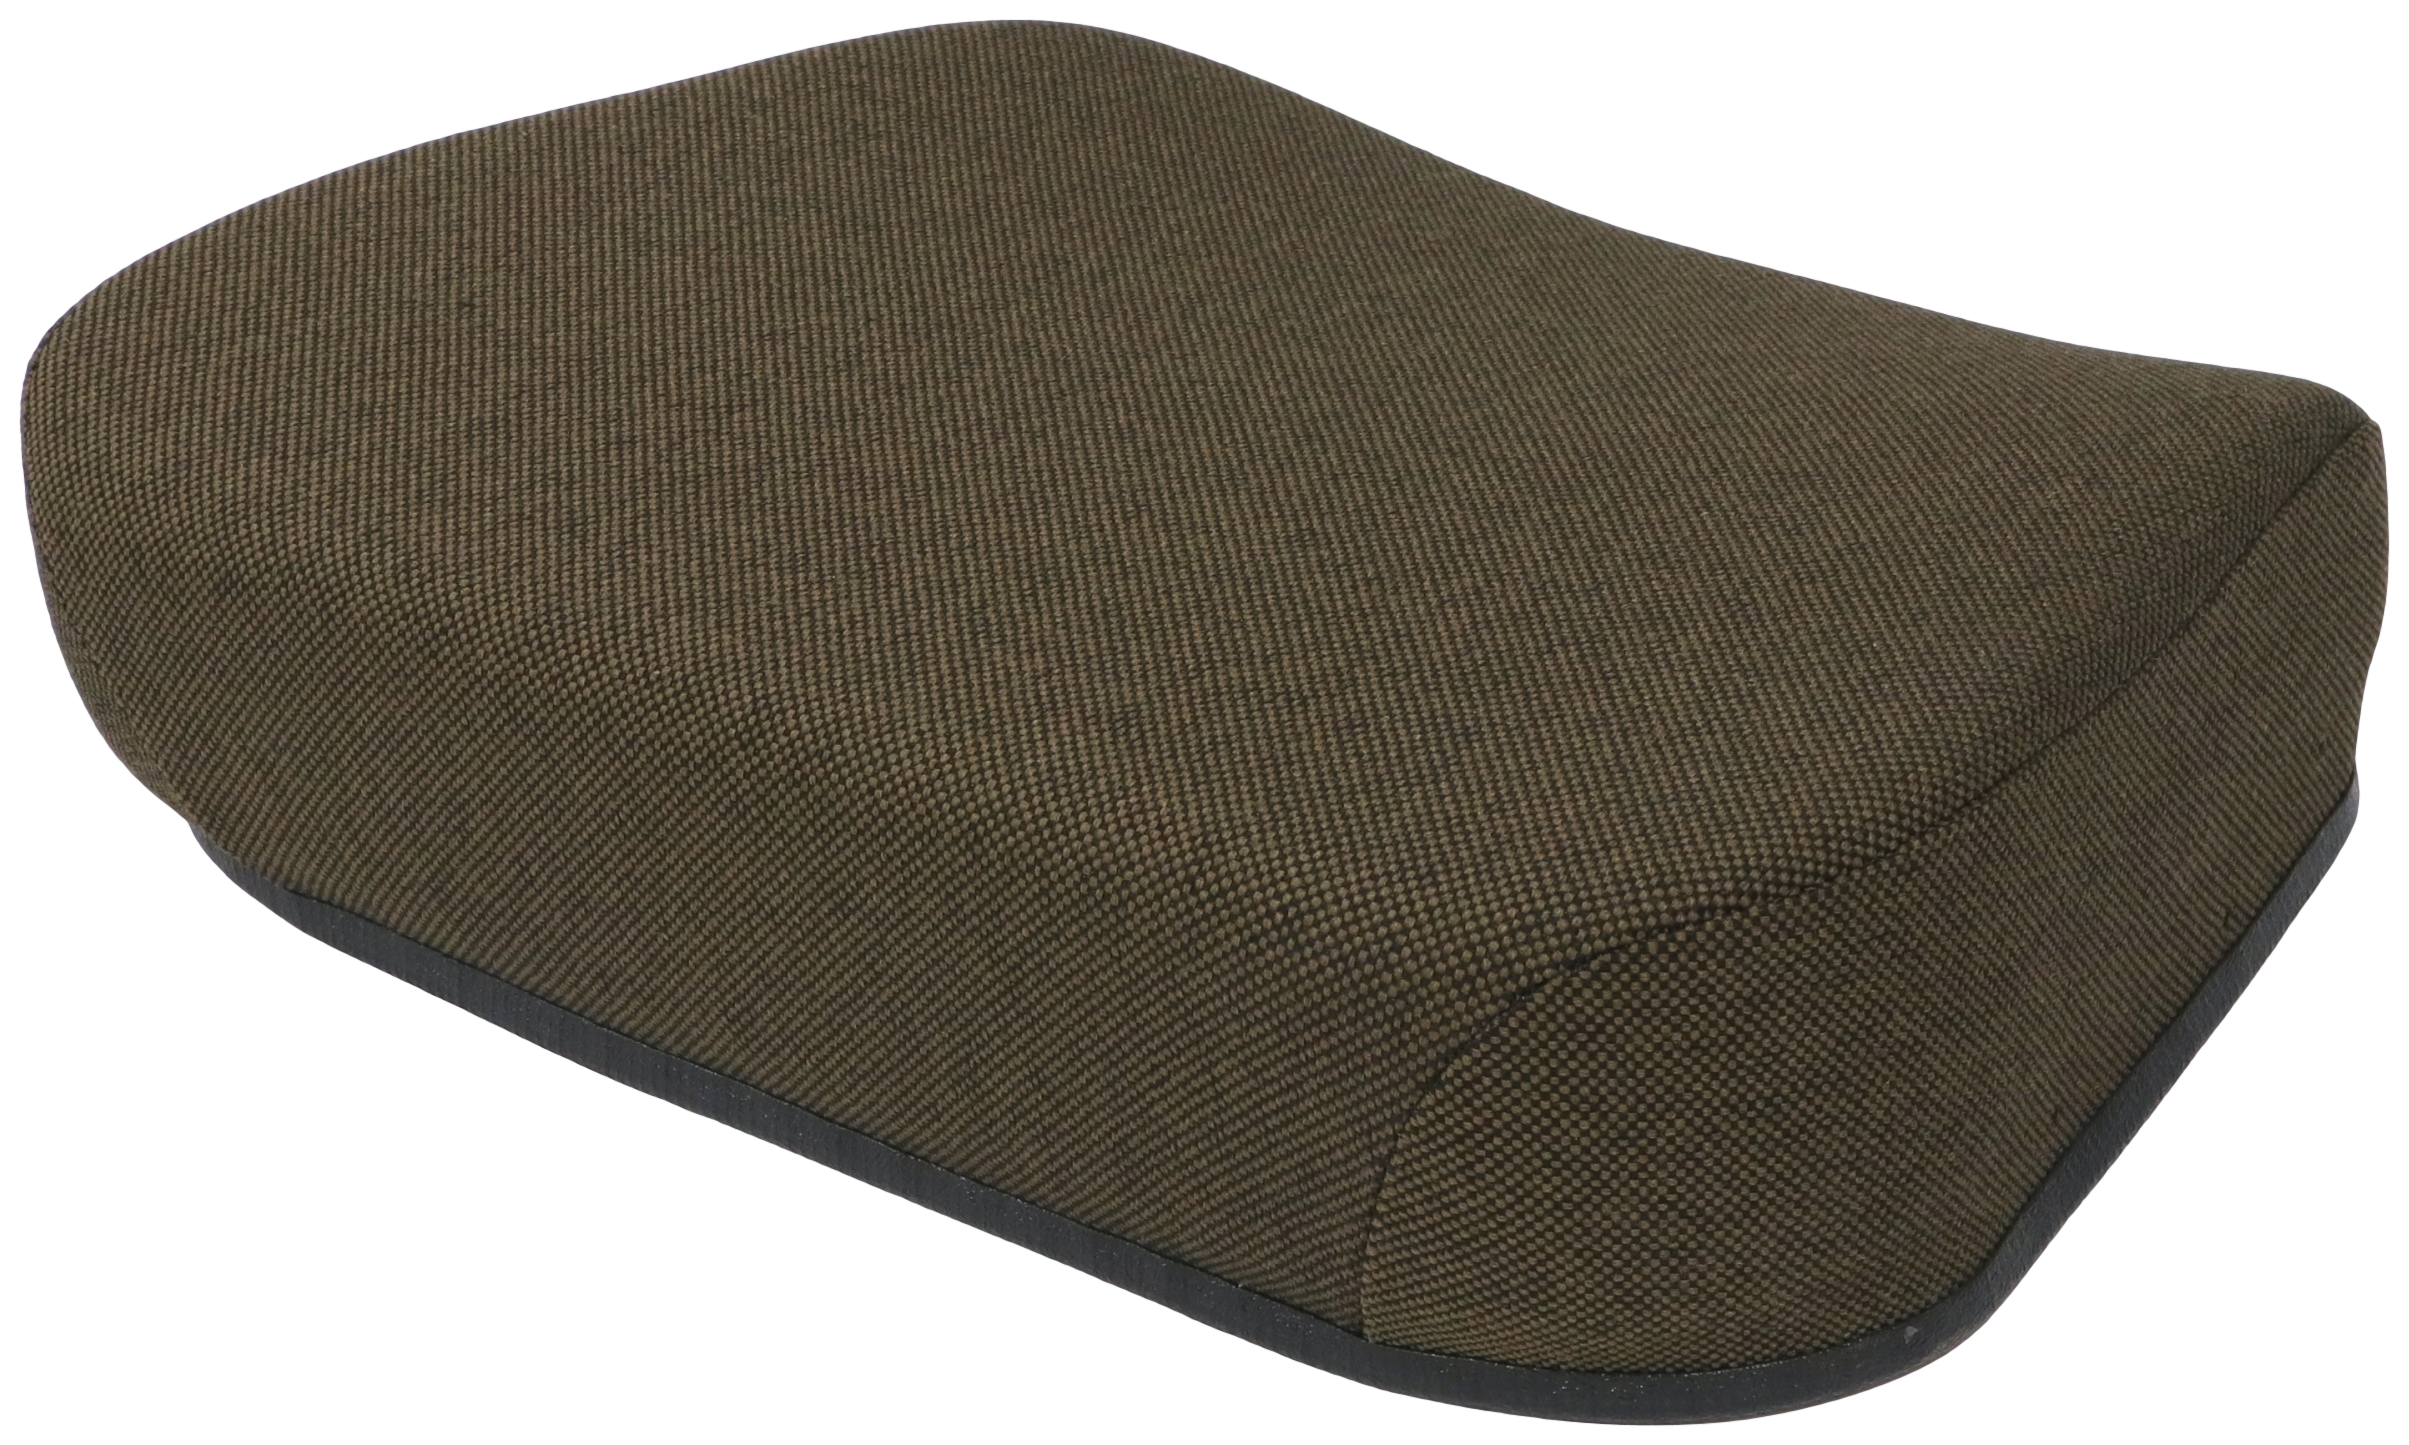 JD PERSONAL POSTURE SEAT - SEAT CUSHION (HYDRAULIC/AIR SUSPENSION) Questions & Answers